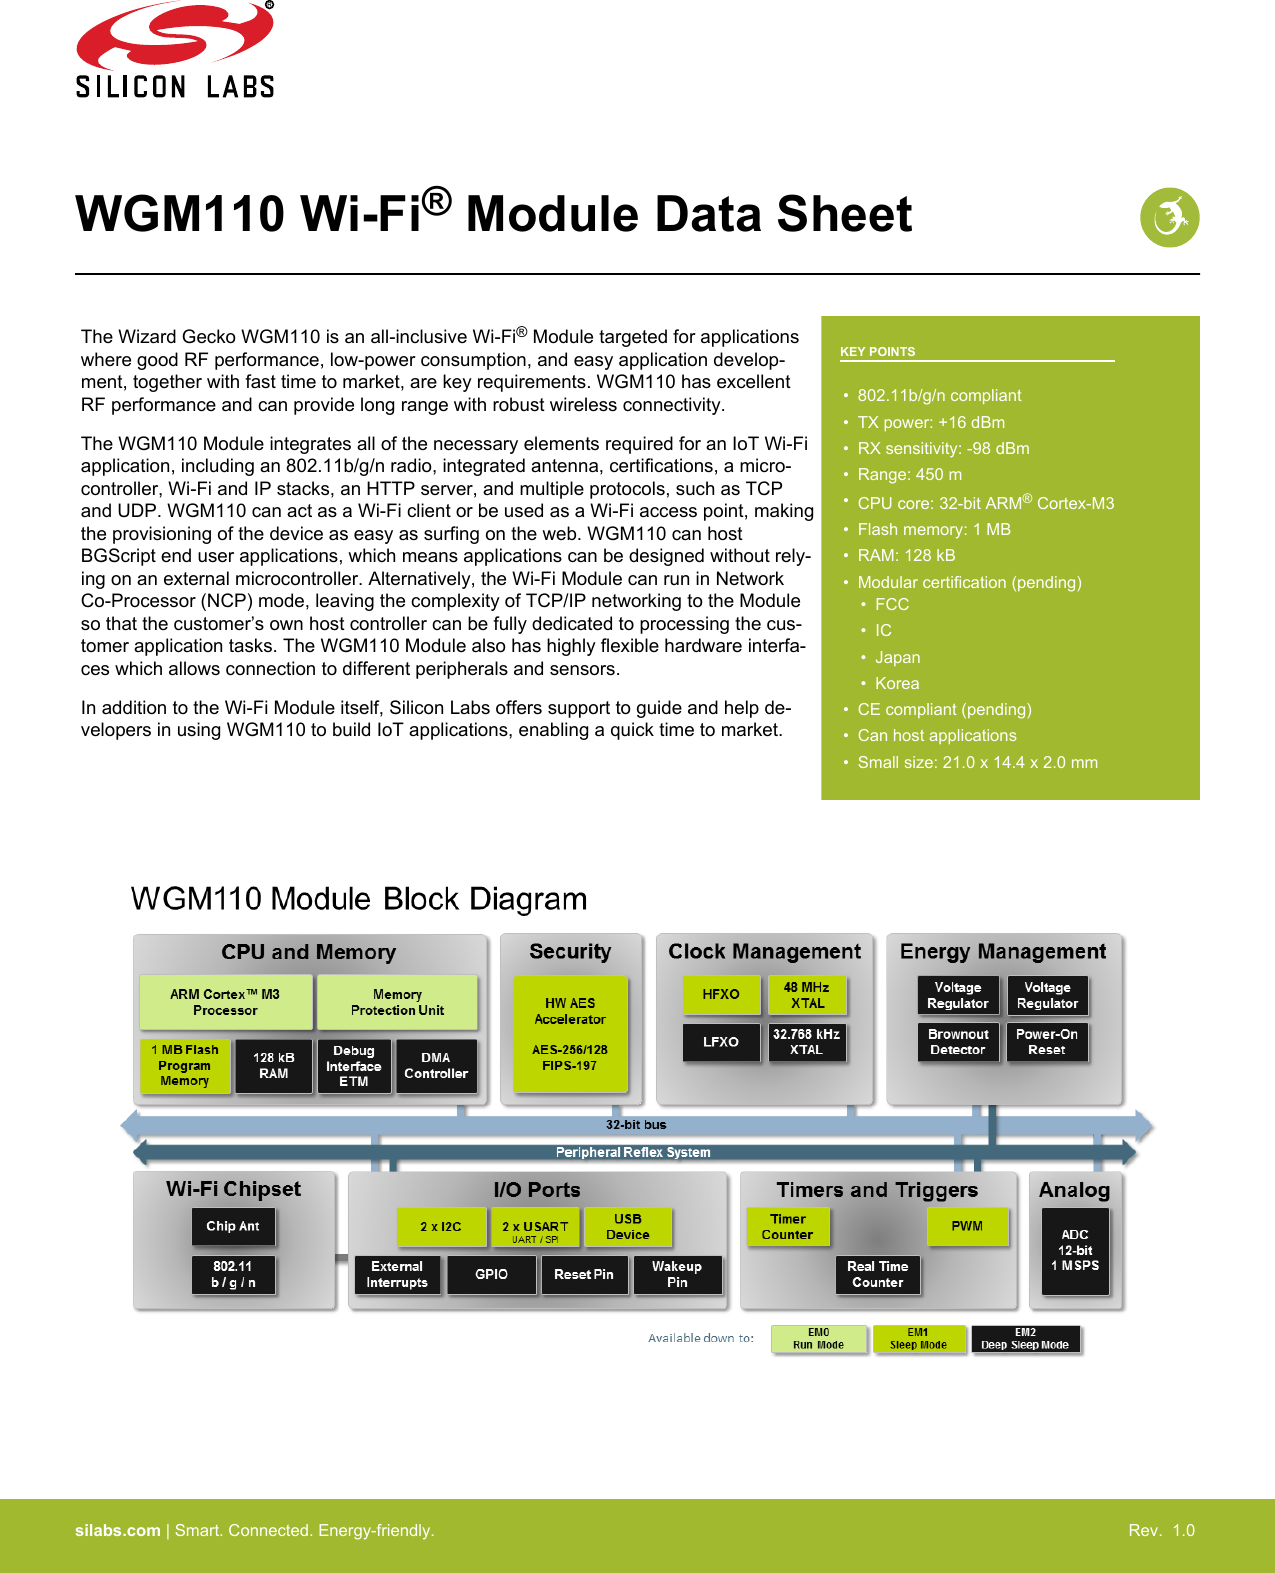 WGM110 Wi-Fi® Module Data SheetThe Wizard Gecko WGM110 is an all-inclusive Wi-Fi® Module targeted for applicationswhere good RF performance, low-power consumption, and easy application develop-ment, together with fast time to market, are key requirements. WGM110 has excellentRF performance and can provide long range with robust wireless connectivity.The WGM110 Module integrates all of the necessary elements required for an IoT Wi-Fiapplication, including an 802.11b/g/n radio, integrated antenna, certifications, a micro-controller, Wi-Fi and IP stacks, an HTTP server, and multiple protocols, such as TCPand UDP. WGM110 can act as a Wi-Fi client or be used as a Wi-Fi access point, makingthe provisioning of the device as easy as surfing on the web. WGM110 can hostBGScript end user applications, which means applications can be designed without rely-ing on an external microcontroller. Alternatively, the Wi-Fi Module can run in NetworkCo-Processor (NCP) mode, leaving the complexity of TCP/IP networking to the Moduleso that the customer’s own host controller can be fully dedicated to processing the cus-tomer application tasks. The WGM110 Module also has highly flexible hardware interfa-ces which allows connection to different peripherals and sensors.In addition to the Wi-Fi Module itself, Silicon Labs offers support to guide and help de-velopers in using WGM110 to build IoT applications, enabling a quick time to market.KEY POINTS• 802.11b/g/n compliant•TX power: +16 dBm• RX sensitivity: -98 dBm• Range: 450 m•CPU core: 32-bit ARM® Cortex-M3• Flash memory: 1 MB• RAM: 128 kB• Modular certification (pending)• FCC• IC• Japan• Korea• CE compliant (pending)• Can host applications• Small size: 21.0 x 14.4 x 2.0 mmsilabs.com | Smart. Connected. Energy-friendly. Rev.  1.0 